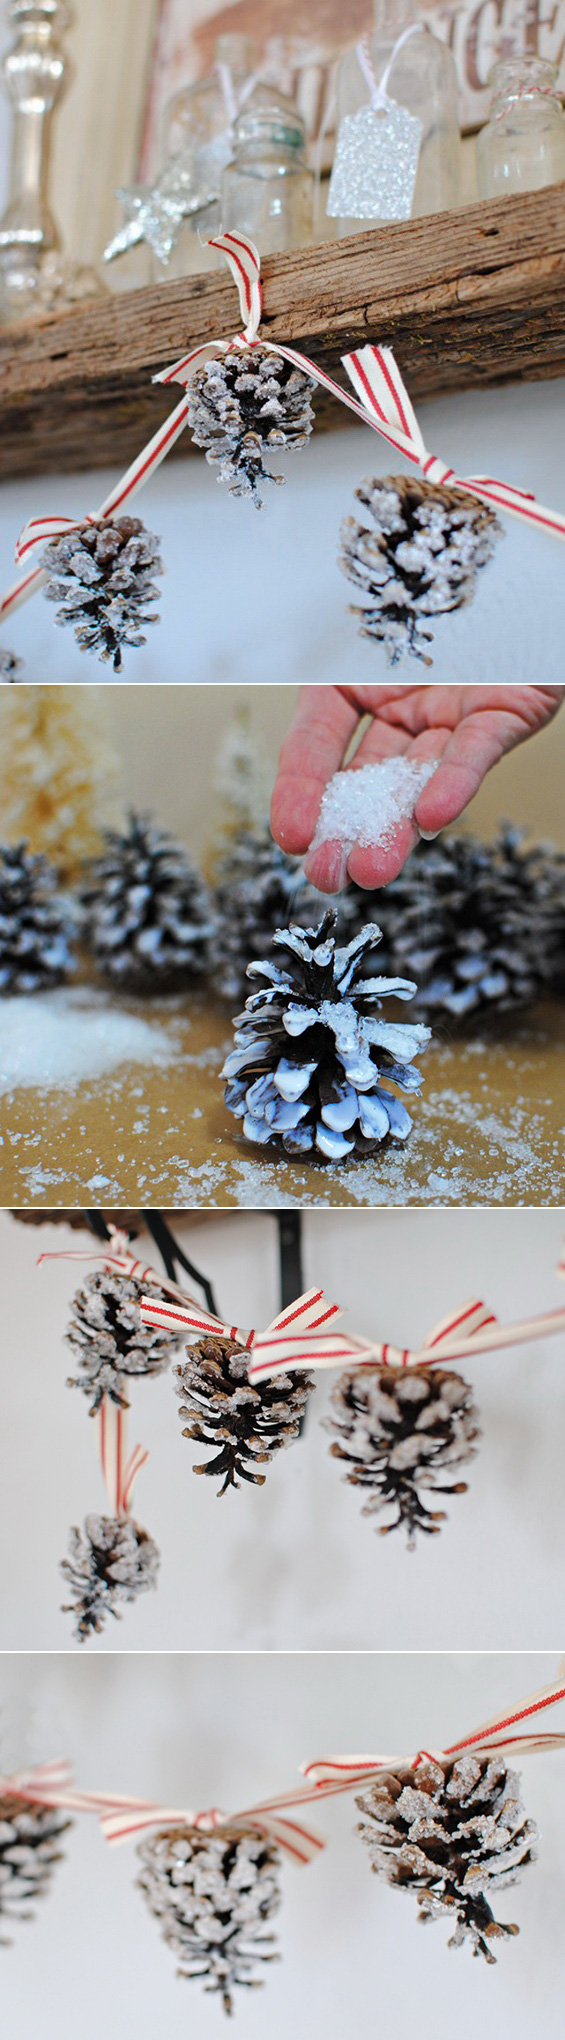 DYI-Holiday-Decoration-for-Your-Home-11